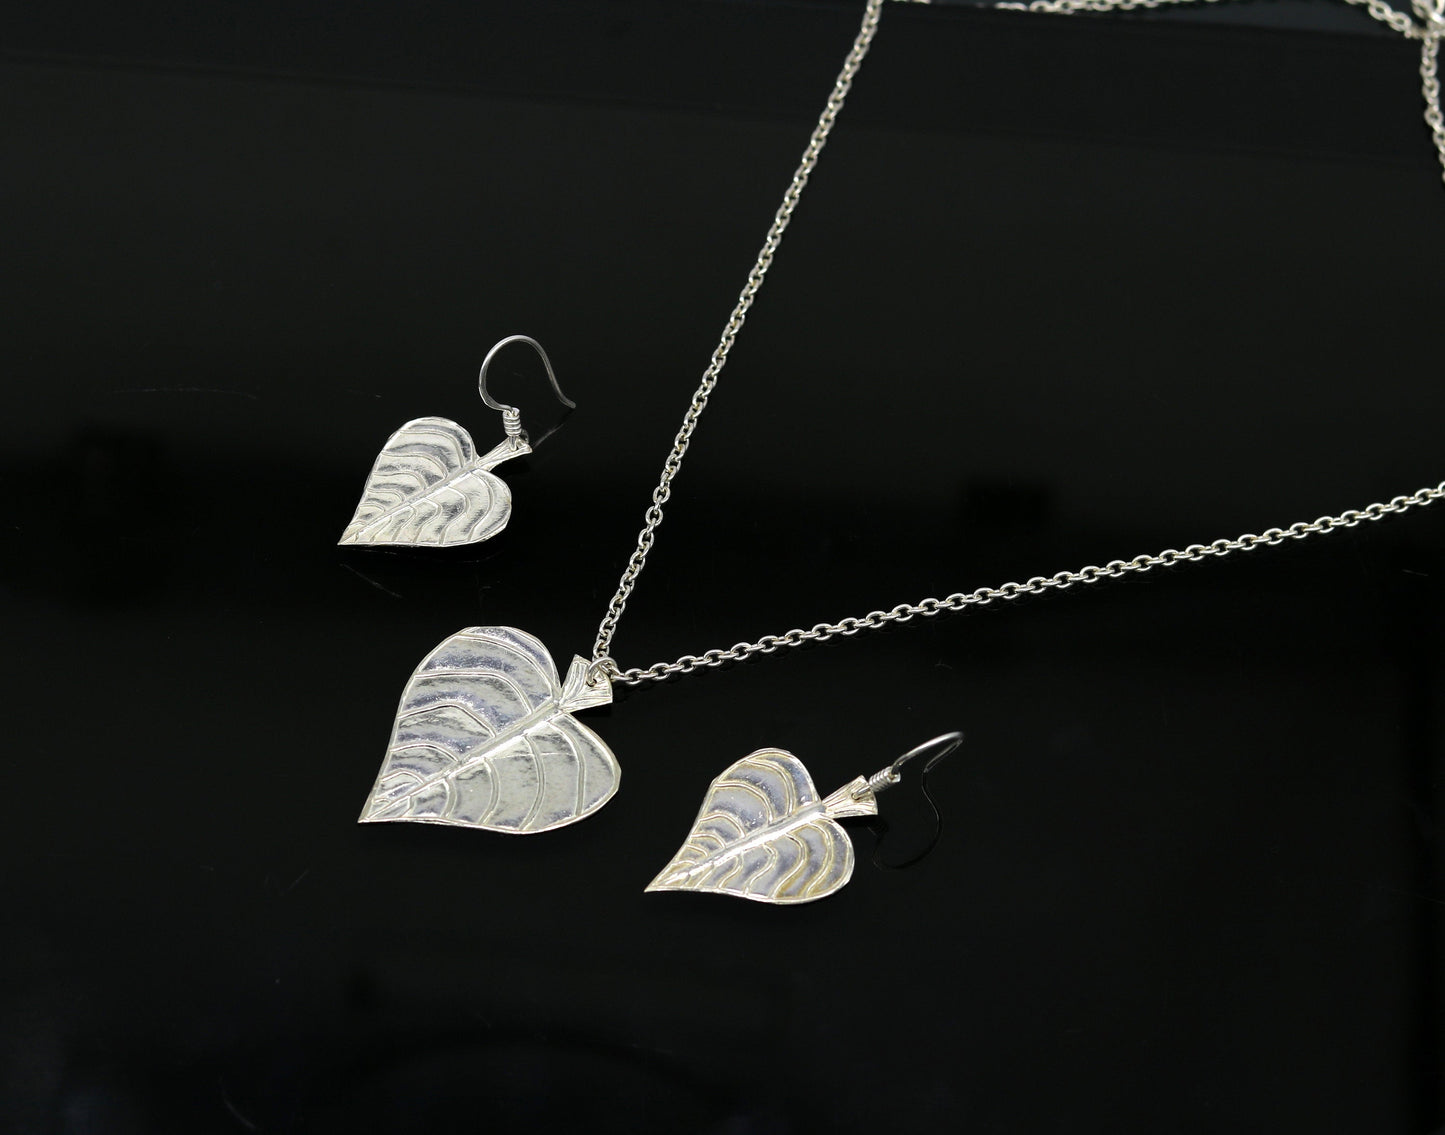 925 sterling silver heart shape peepal tree leaves pendant necklace and hoops earring customized brides jewelry, belly dance jewelry nec69 - TRIBAL ORNAMENTS